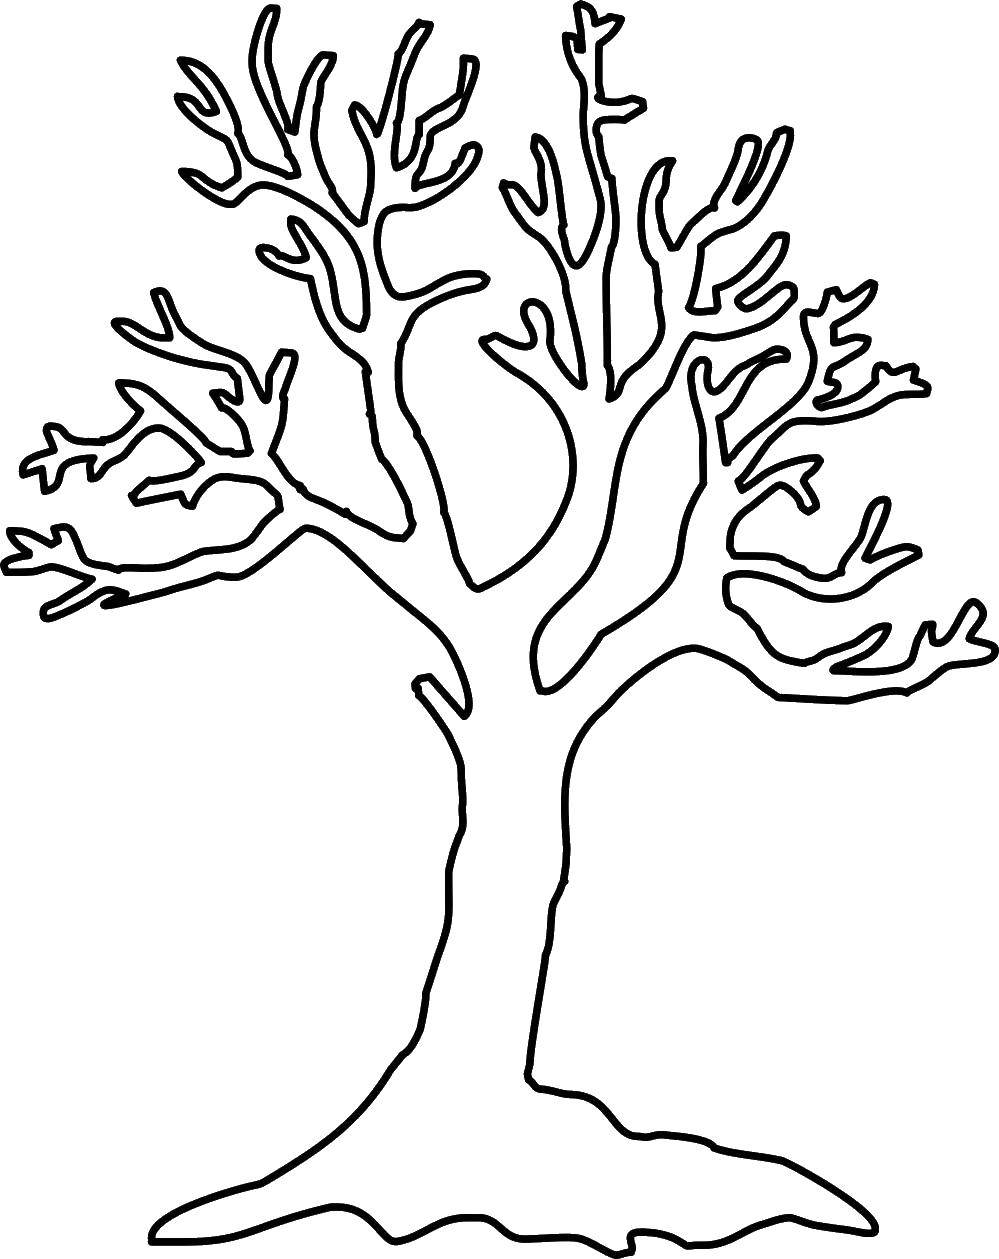 Coloring Tree without leaves. Category tree. Tags:  The trees.